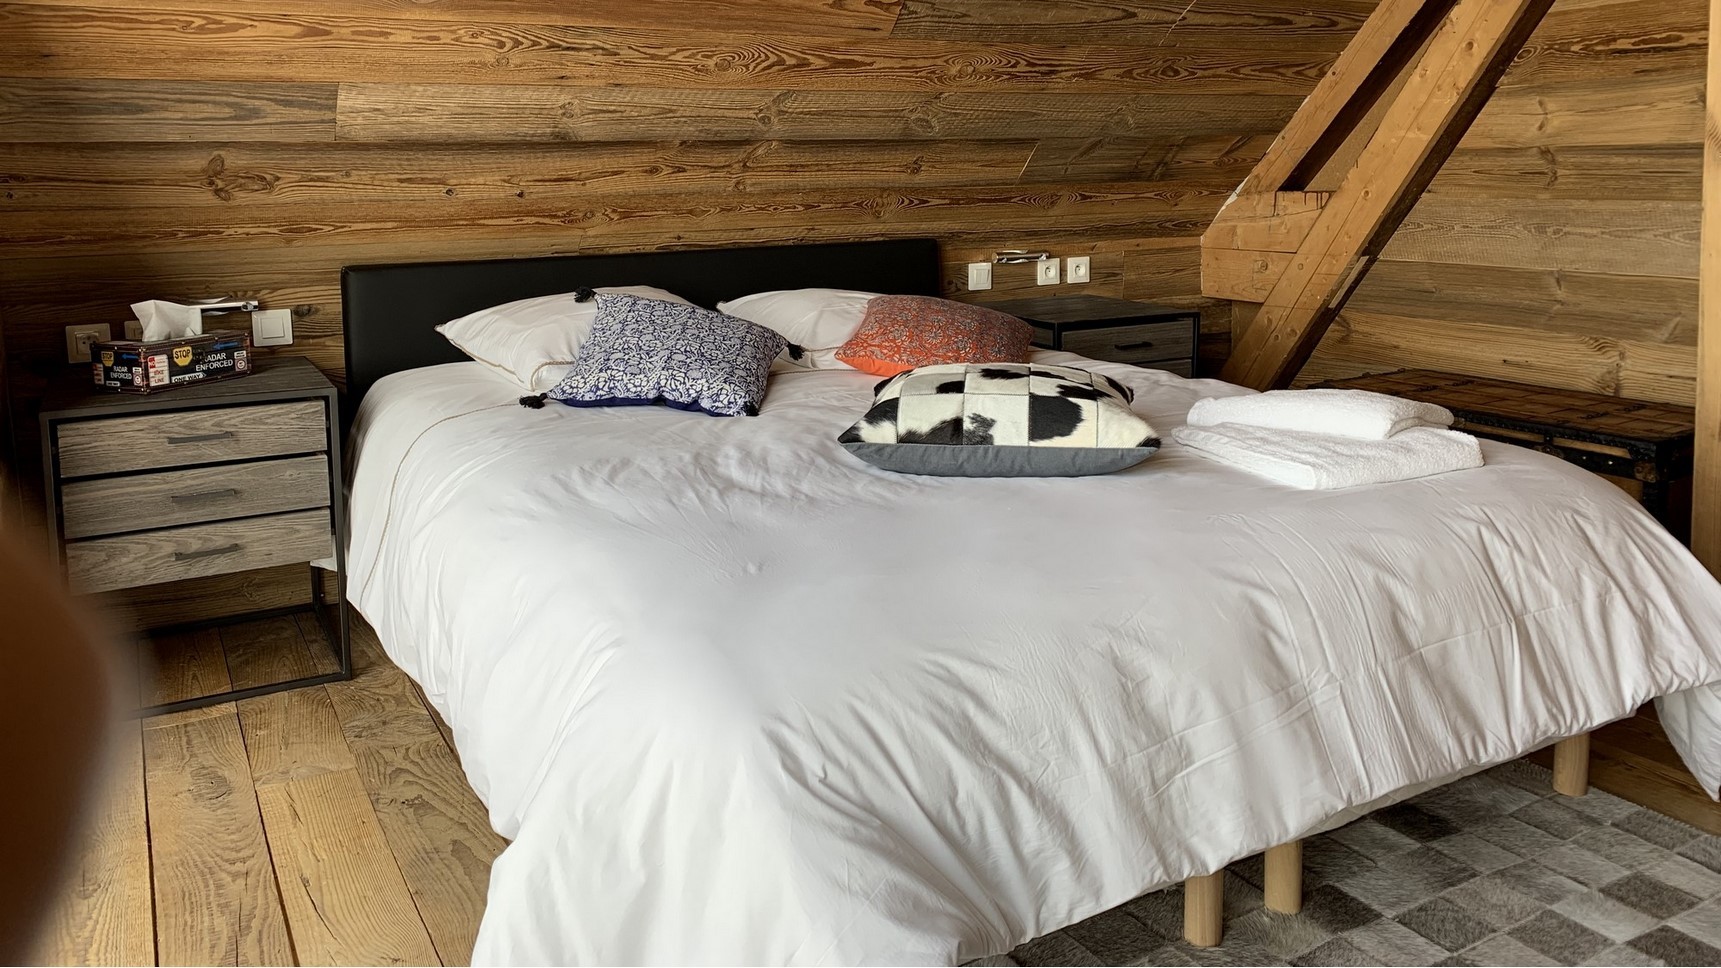 Super Besse chalet, Anorak chalet, Val d'Enfer bedroom, king size bed and cushions